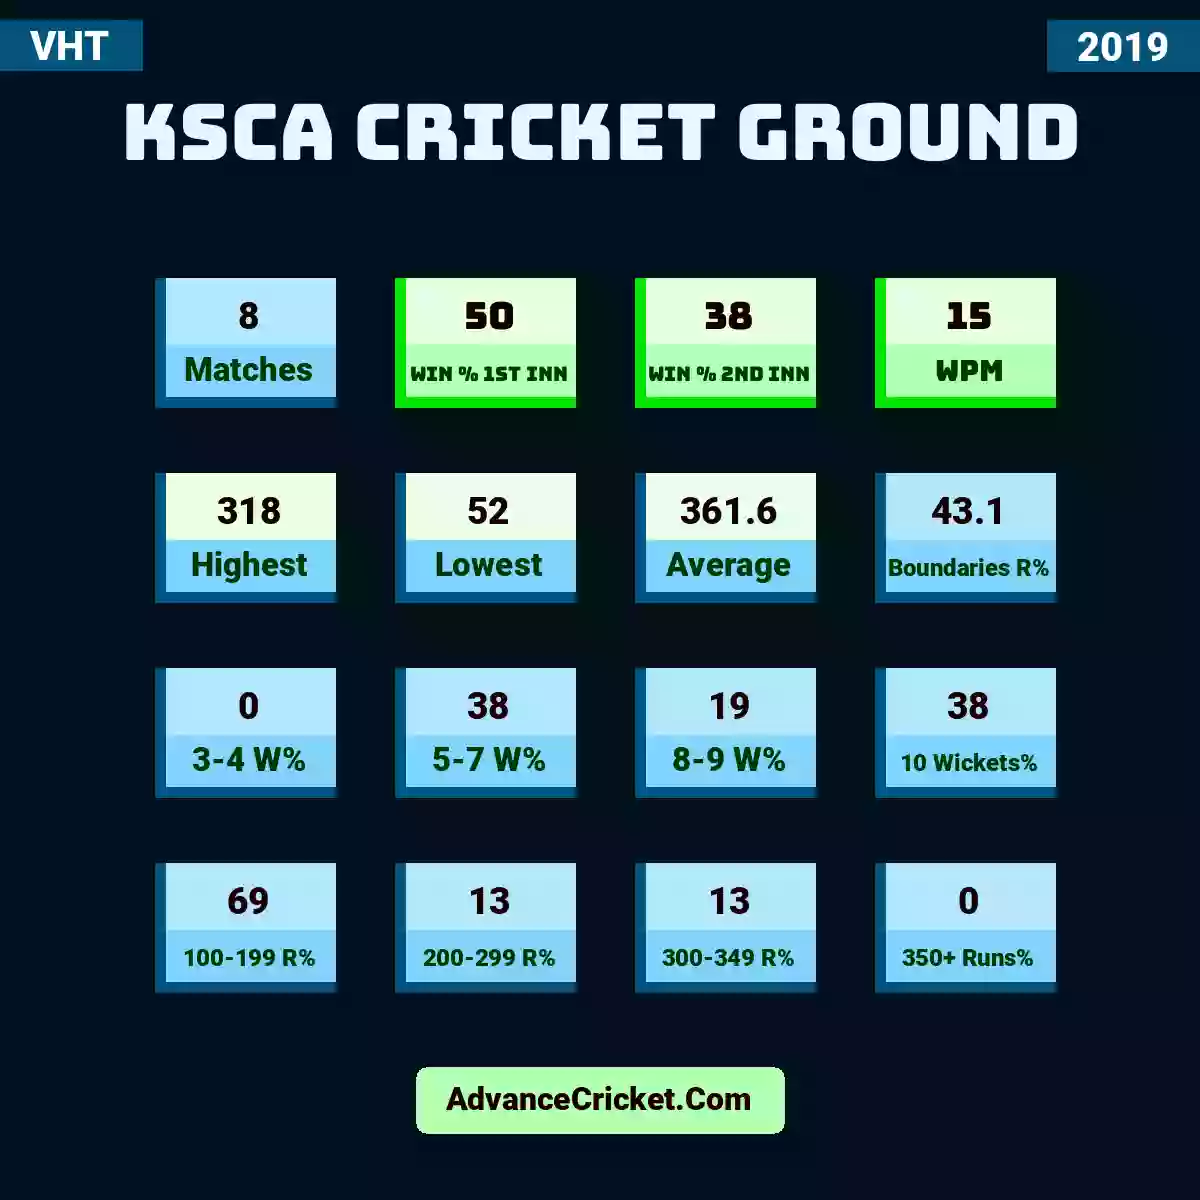 Image showing KSCA Cricket Ground with Matches: 8, Win % 1st Inn: 50, Win % 2nd Inn: 38, WPM: 15, Highest: 318, Lowest: 52, Average: 361.6, Boundaries R%: 43.1, 3-4 W%: 0, 5-7 W%: 38, 8-9 W%: 19, 10 Wickets%: 38, 100-199 R%: 69, 200-299 R%: 13, 300-349 R%: 13, 350+ Runs%: 0.